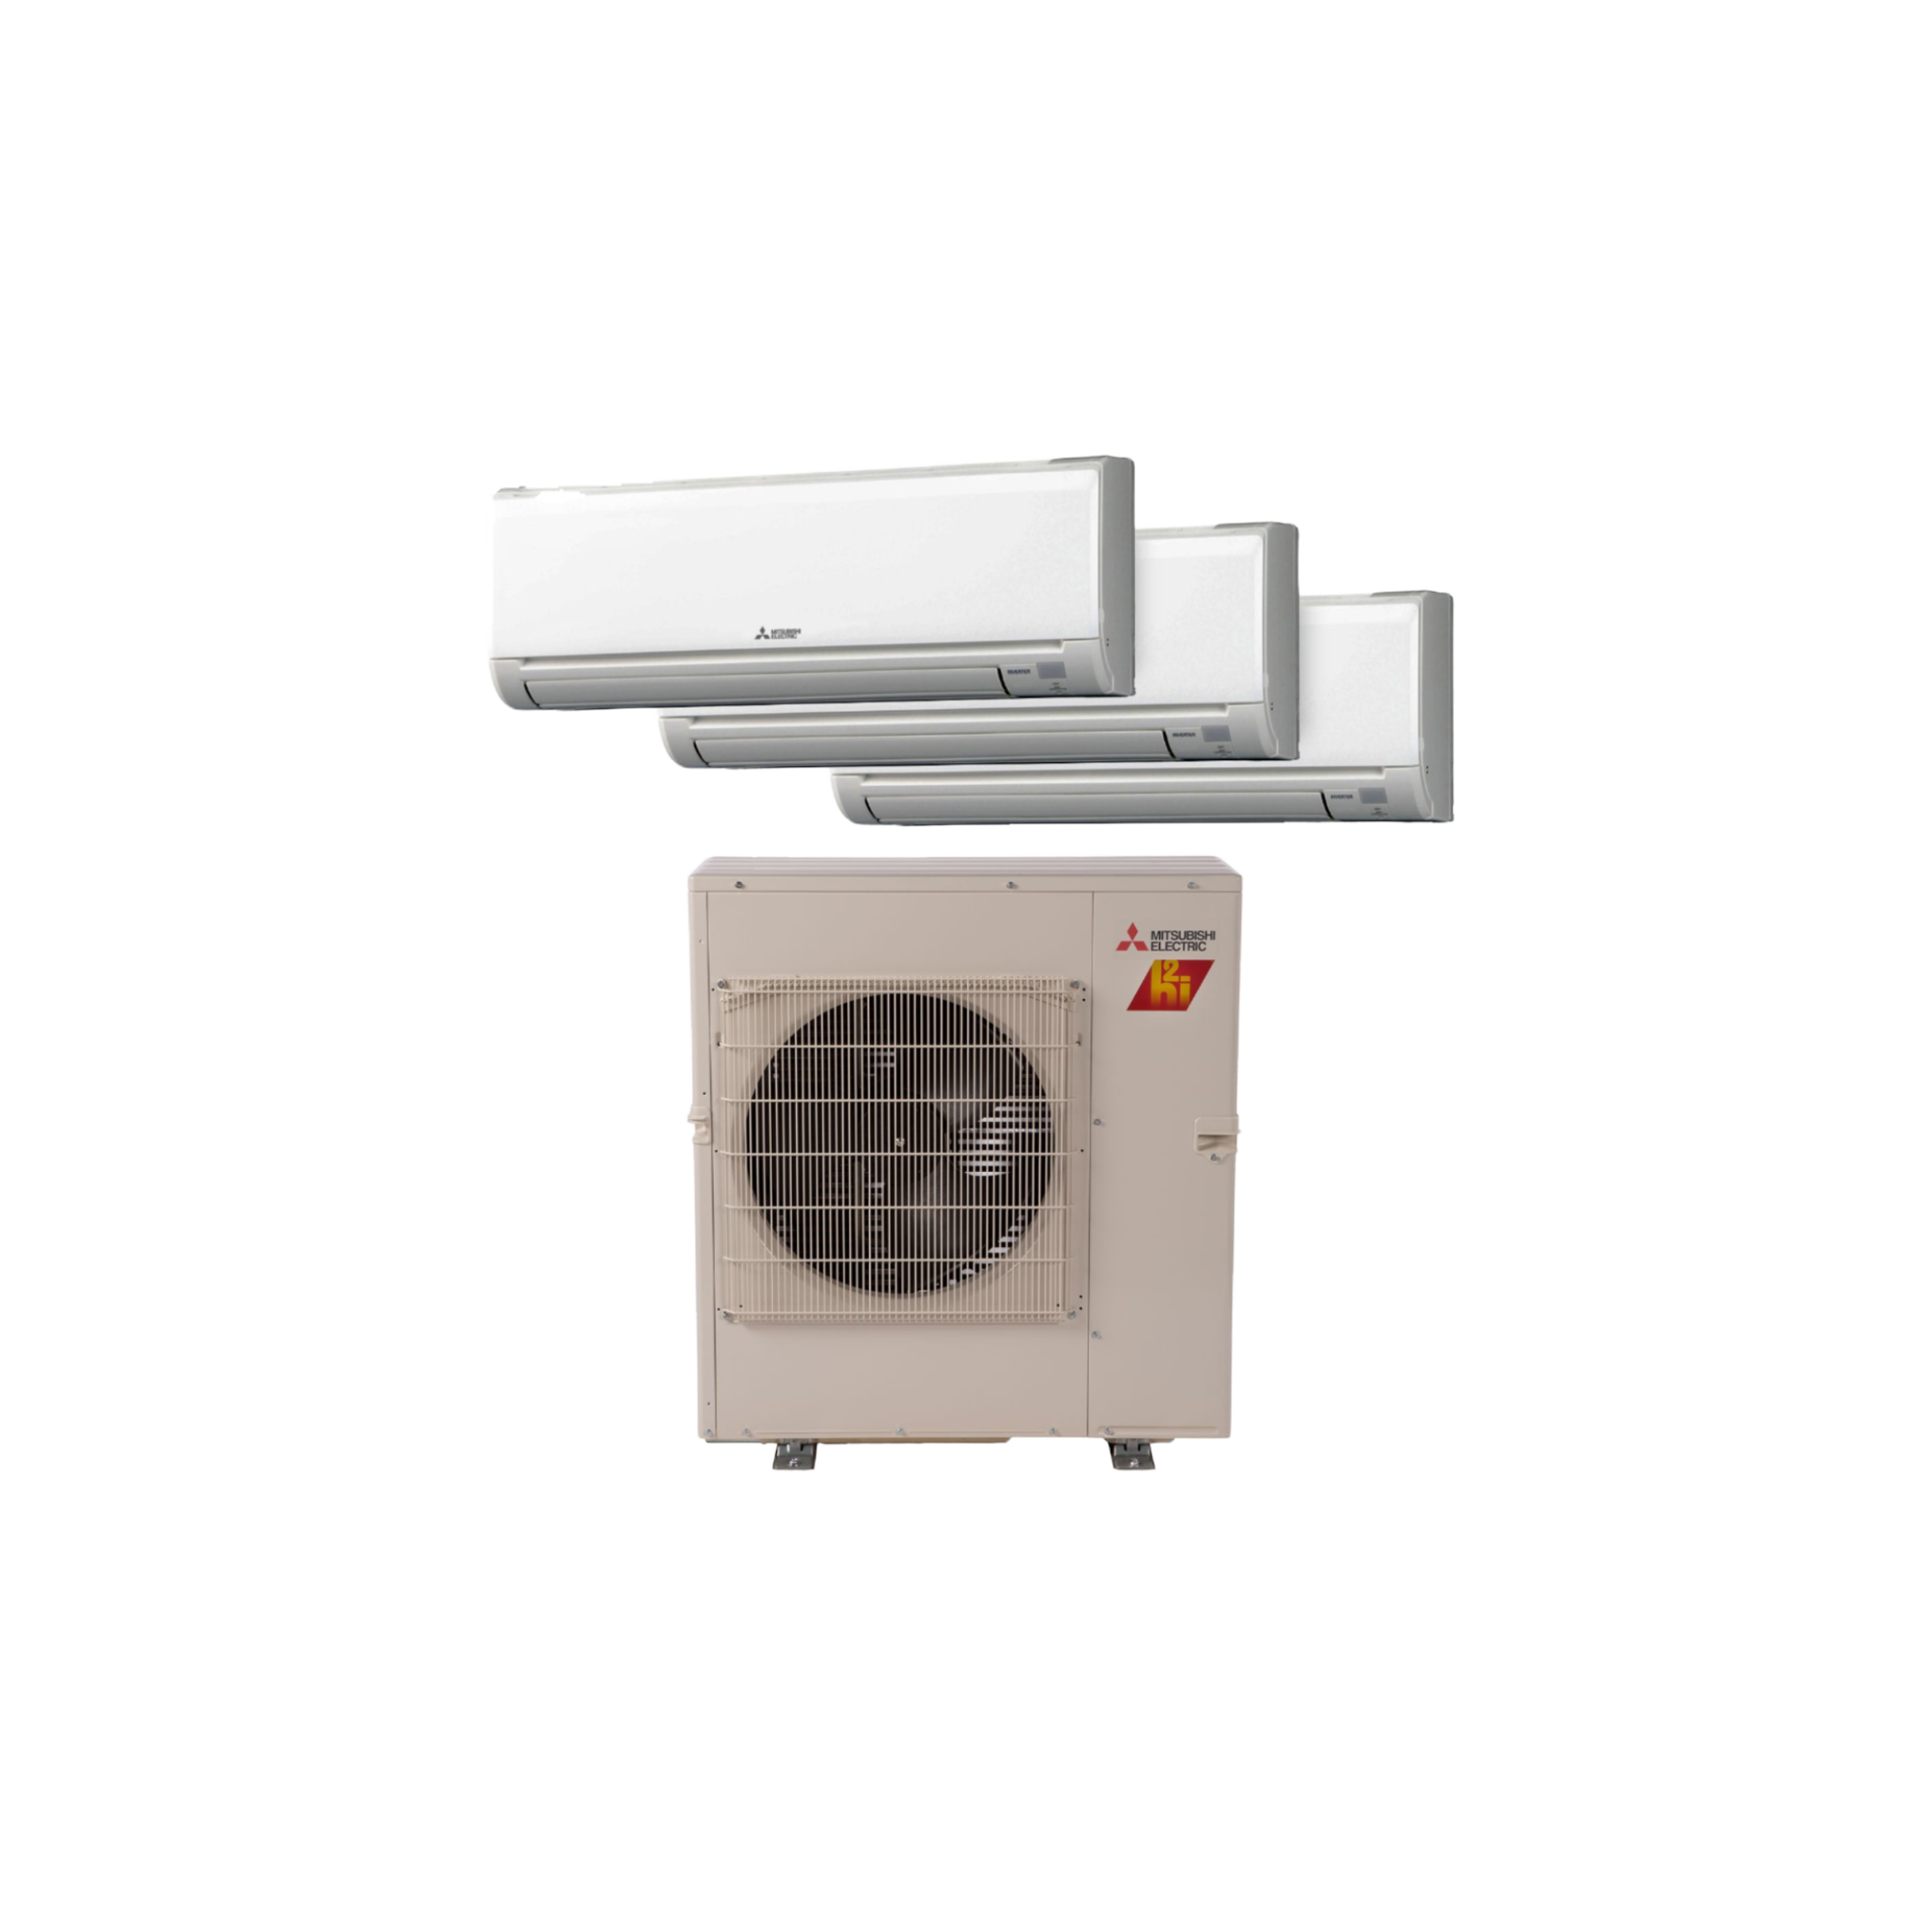 Mitsubishi 3 Zone 19 SEER Multi-Zone Ductless Mini-Split System Hyper Heat Pump Air Conditioner M Series Model MXZ-3C24NAHZ2 24000 BTU for Outdoor Unit Connected with 3 Indoor units, R-410A